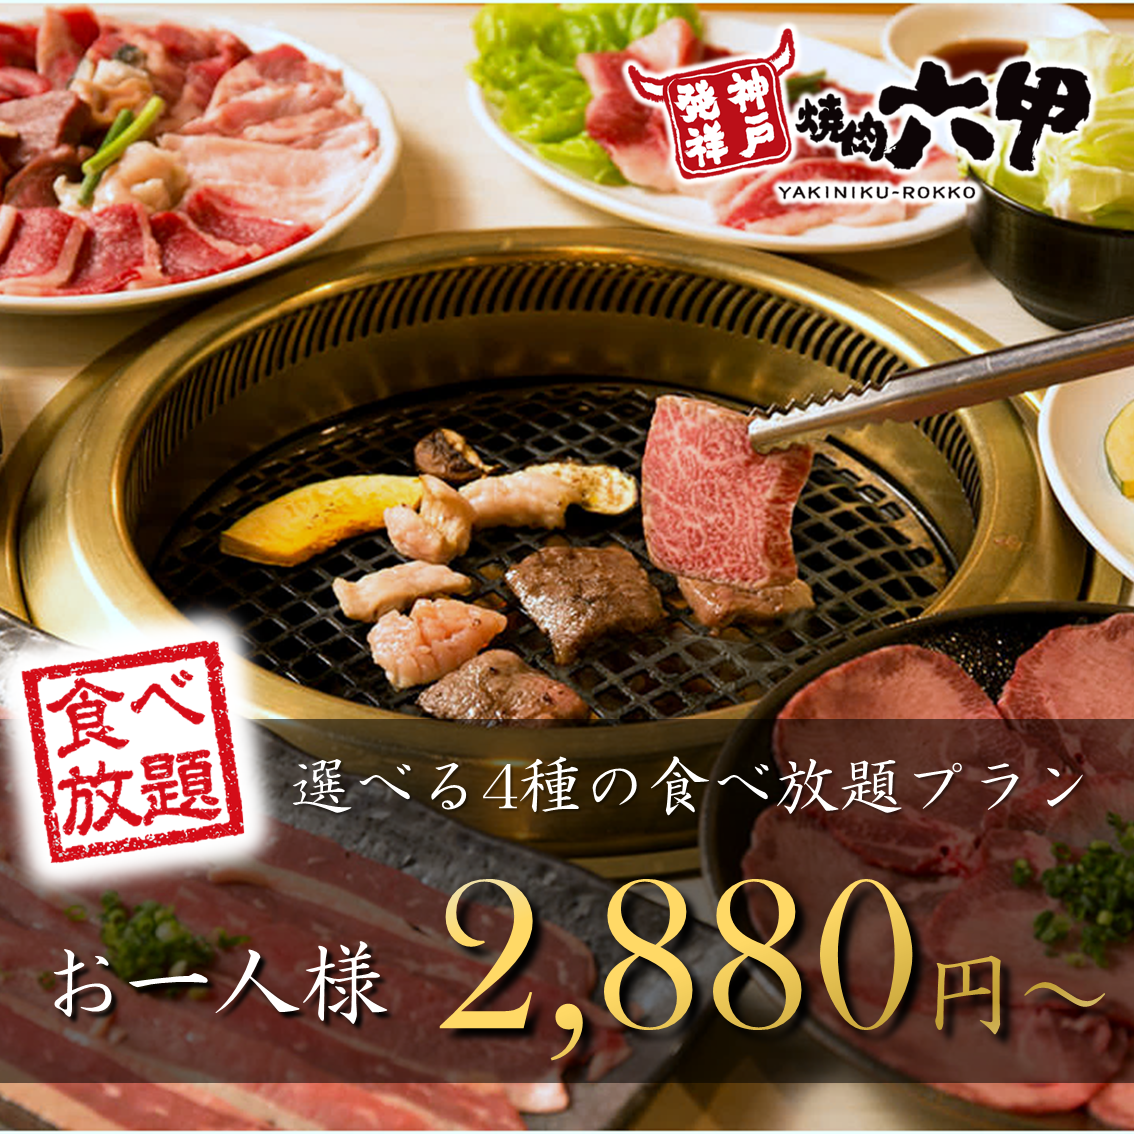 [When you want to eat big!] All-you-can-eat plan from 2,880 yen